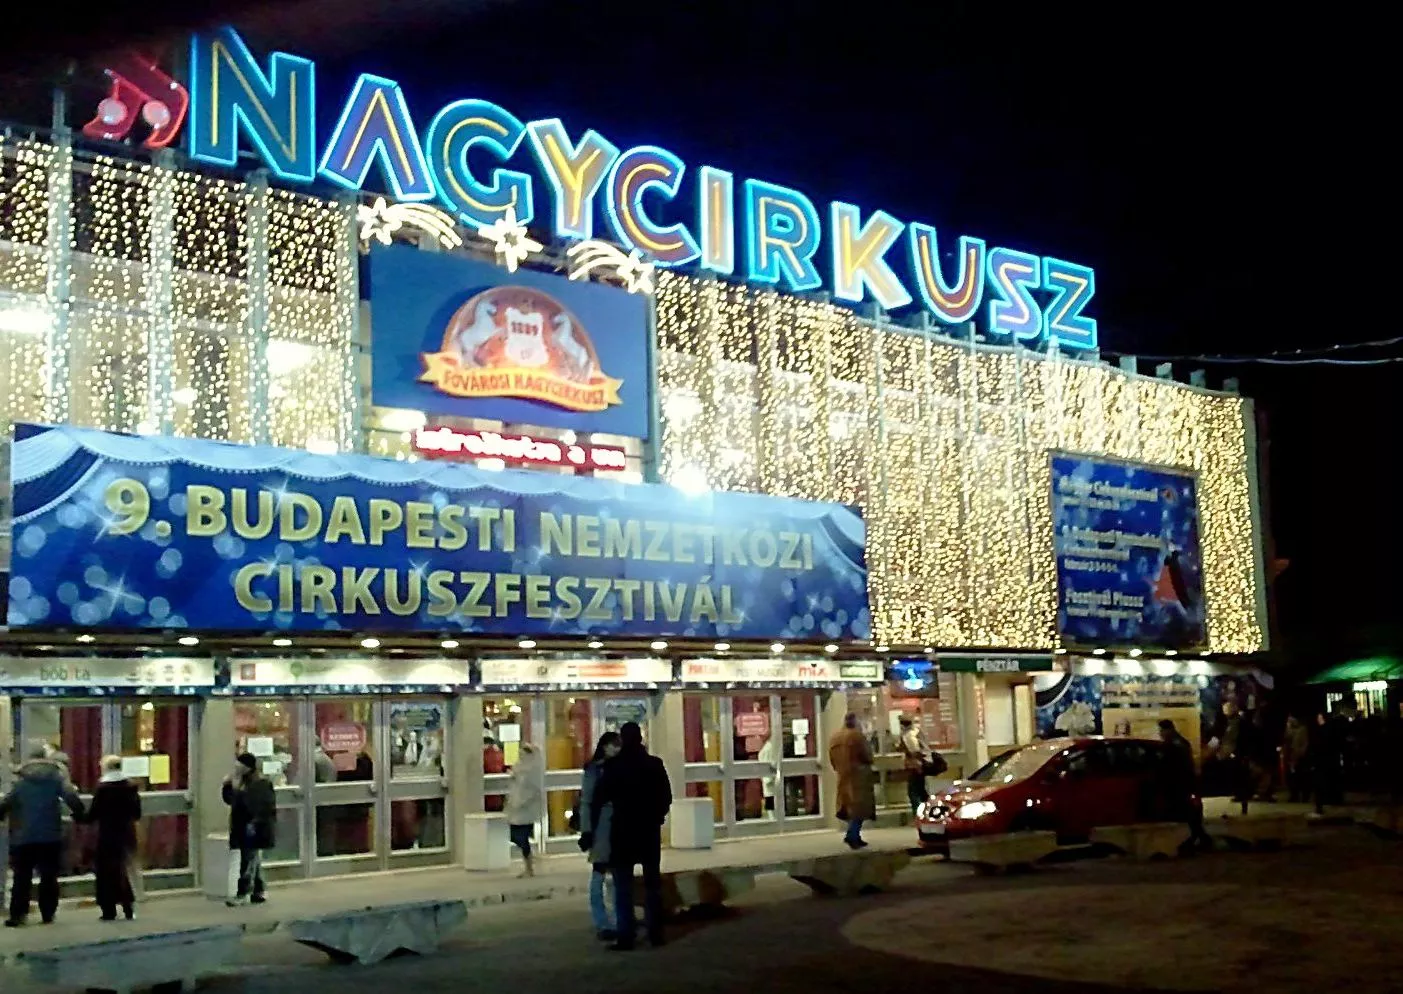 Capital Circus of Budapest in Hungary, Europe | Shows - Rated 3.8